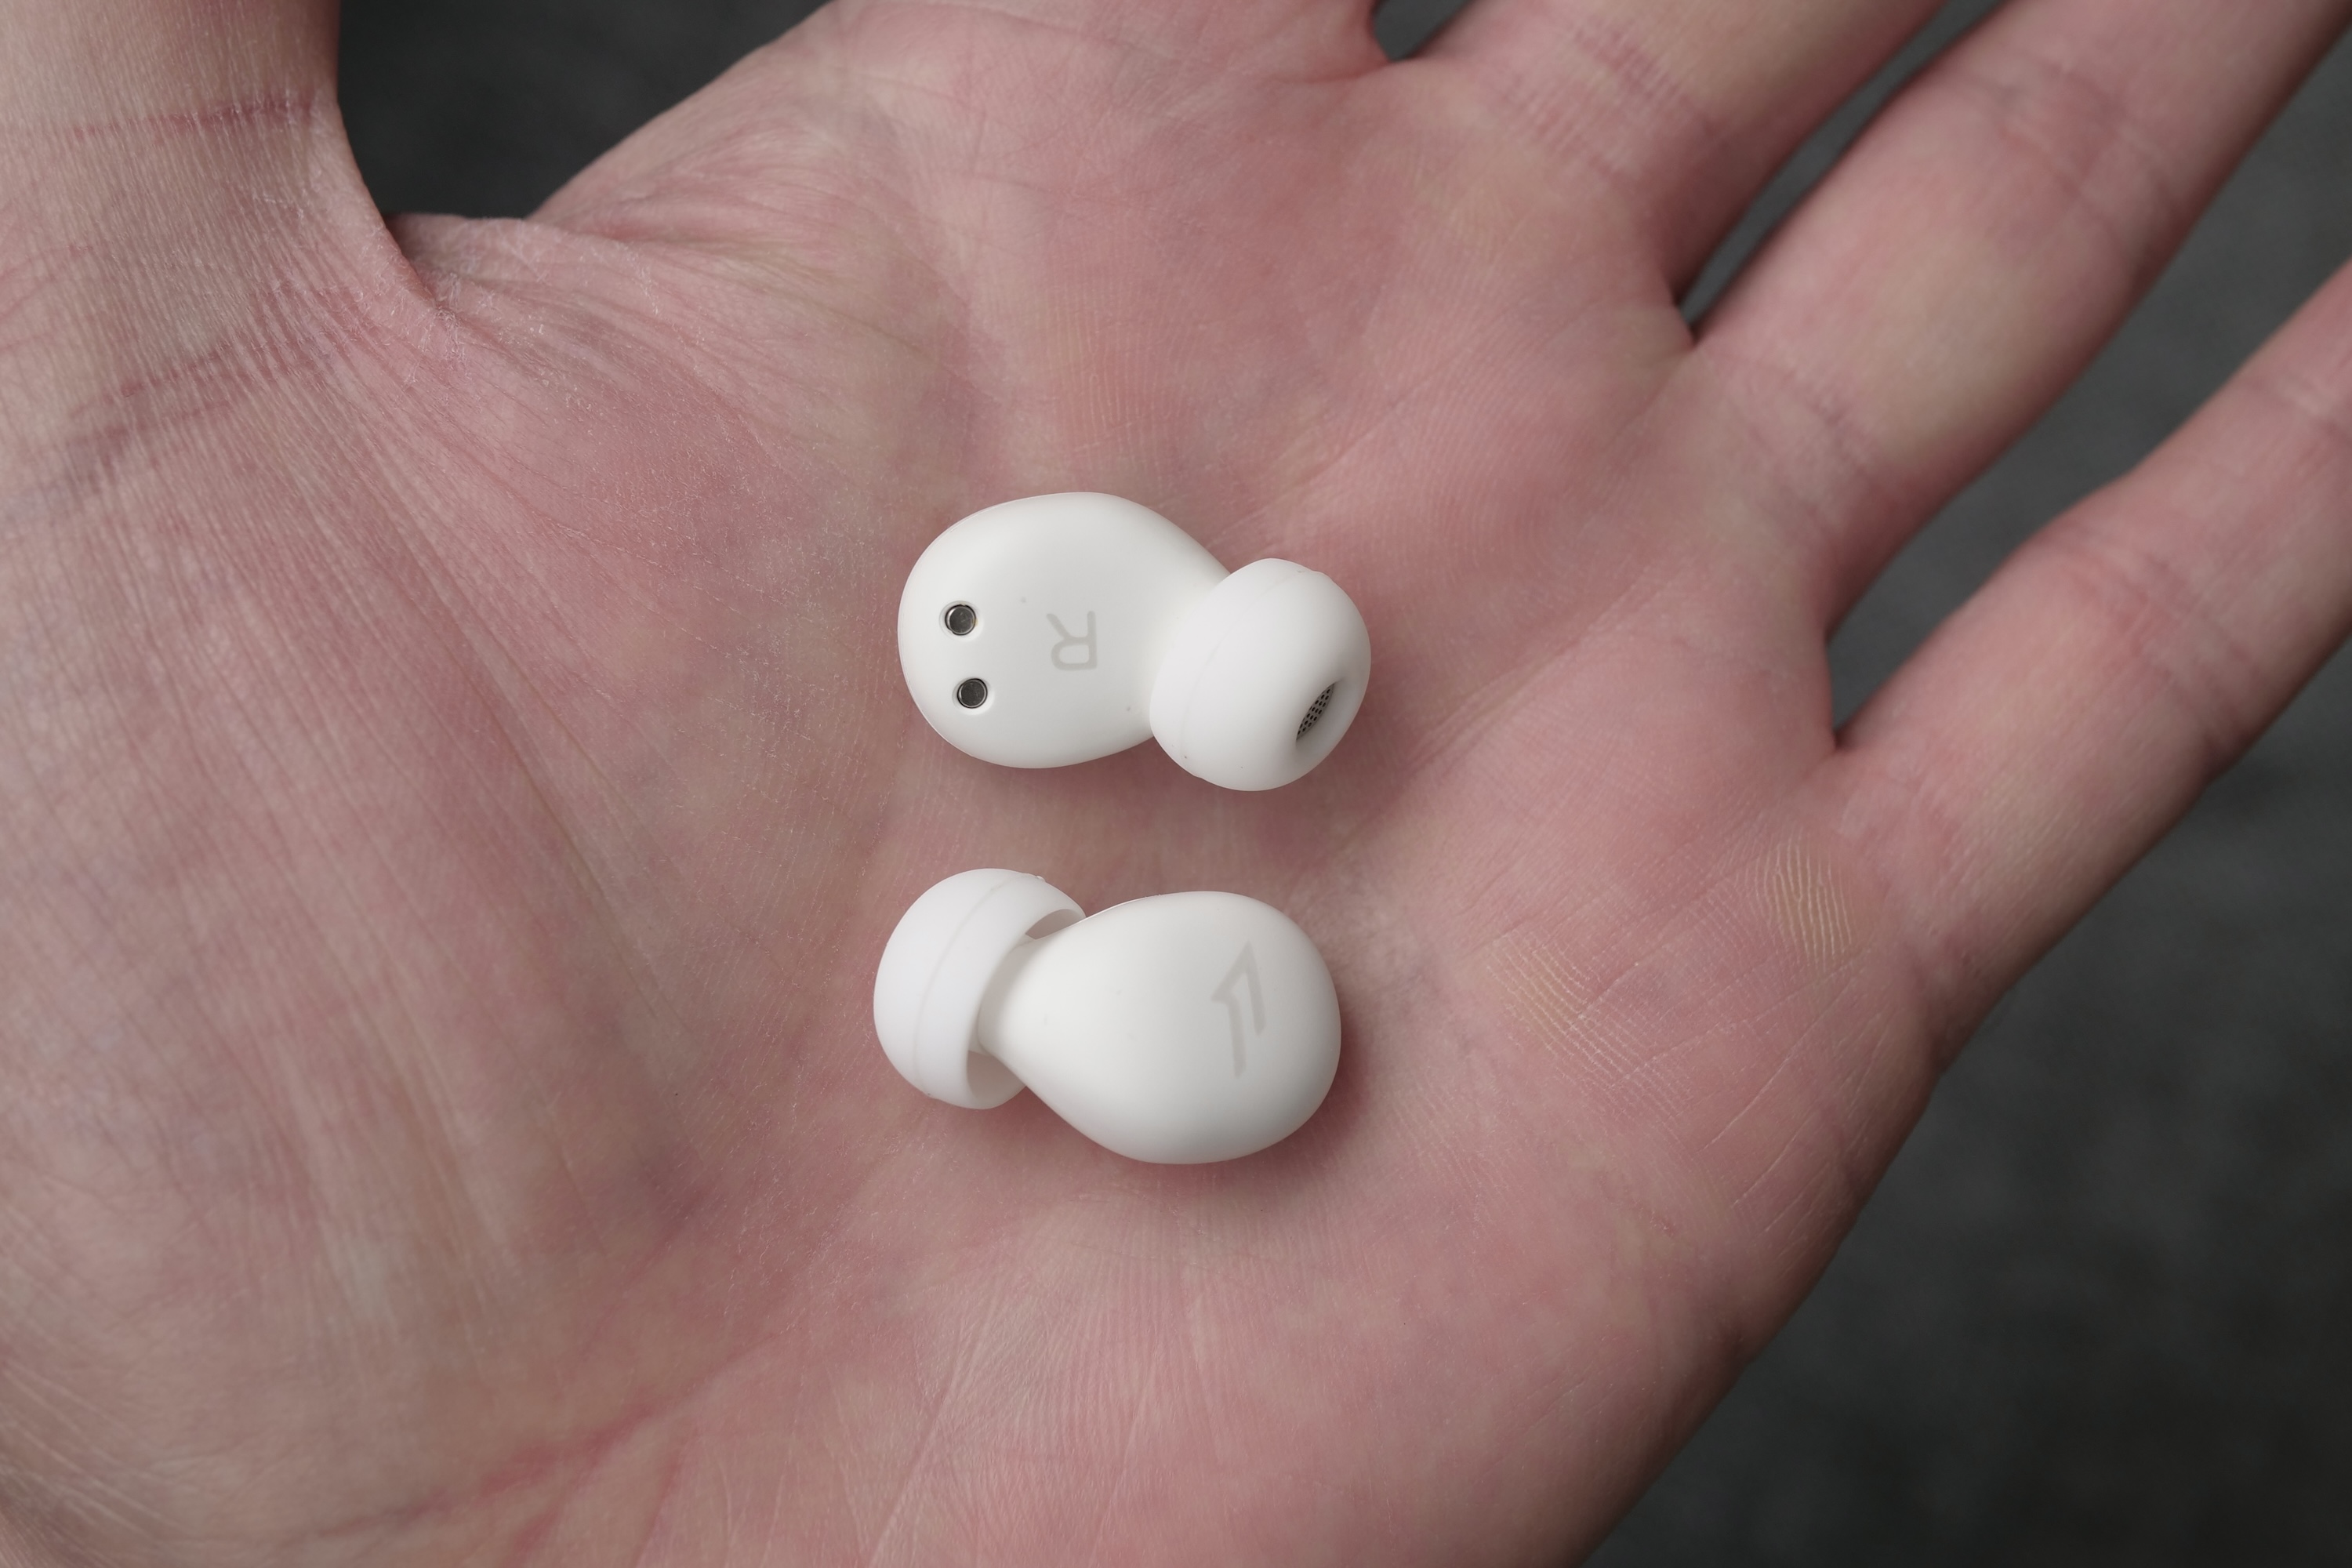 The 1More Z30 Sleeping Earbuds's in a person's palm.